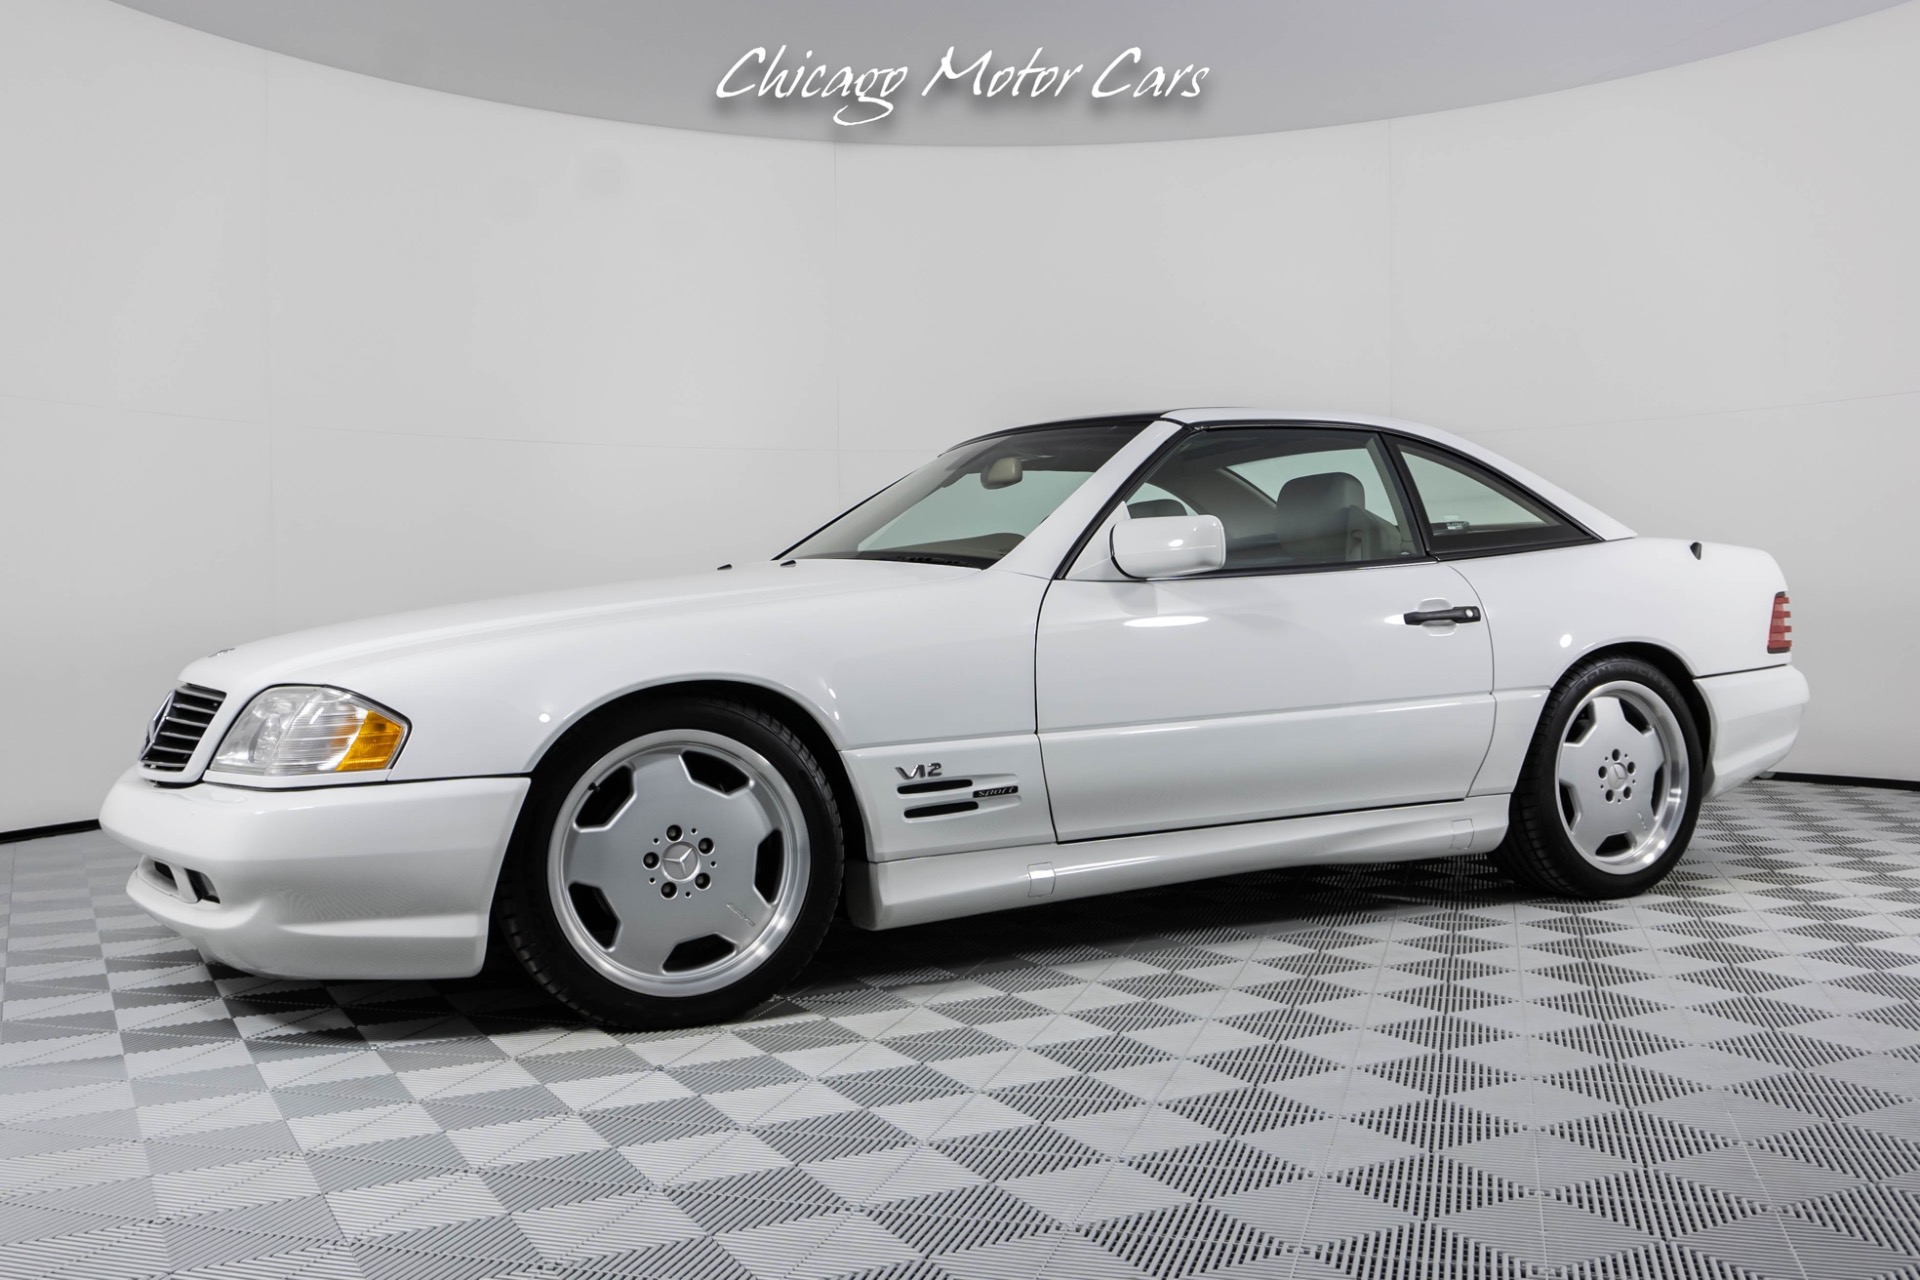 Used-1998-Mercedes-Benz-SL600-ROADSTER-MINT-CONDITION-REMOVABLE-HARDTOP-WITH-PANORAMIC-GLASS-ROOF